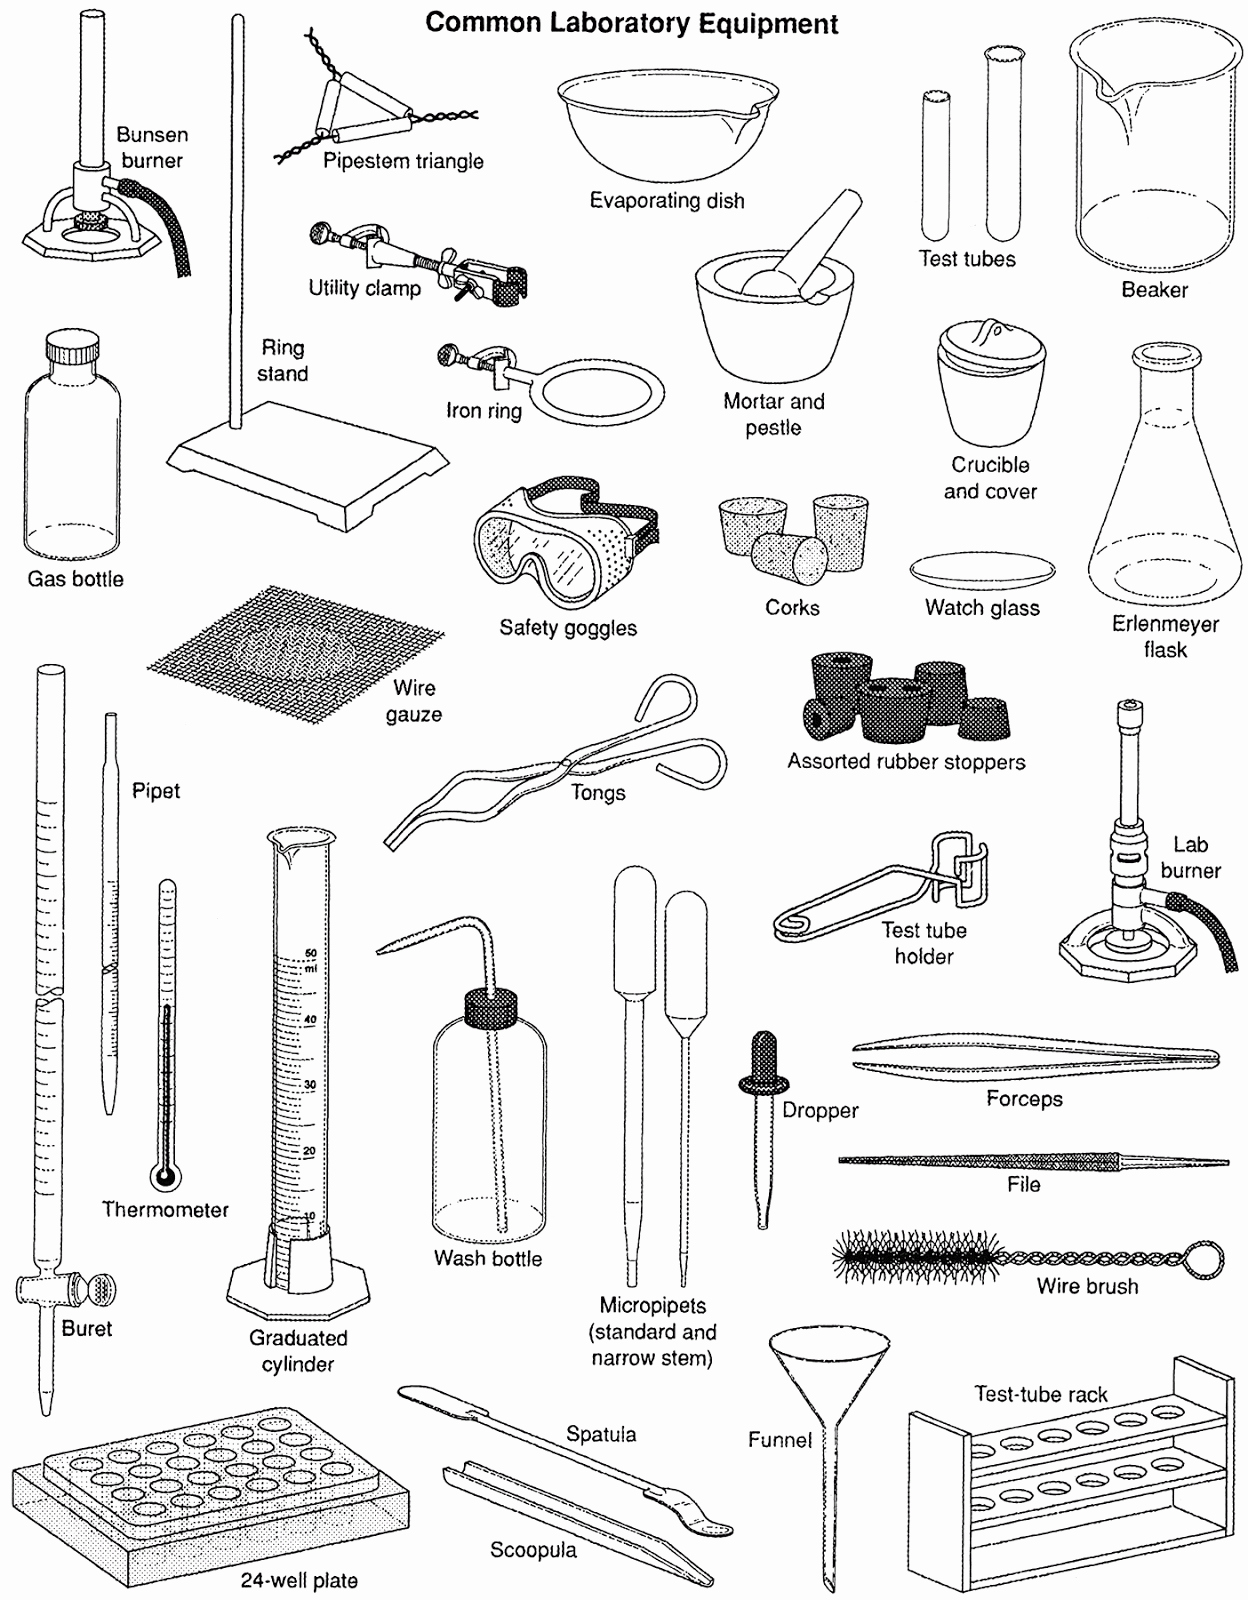 Chemistry Lab Equipment Worksheet Best Of Mr forde Life Science Review Mon Lab Equipment